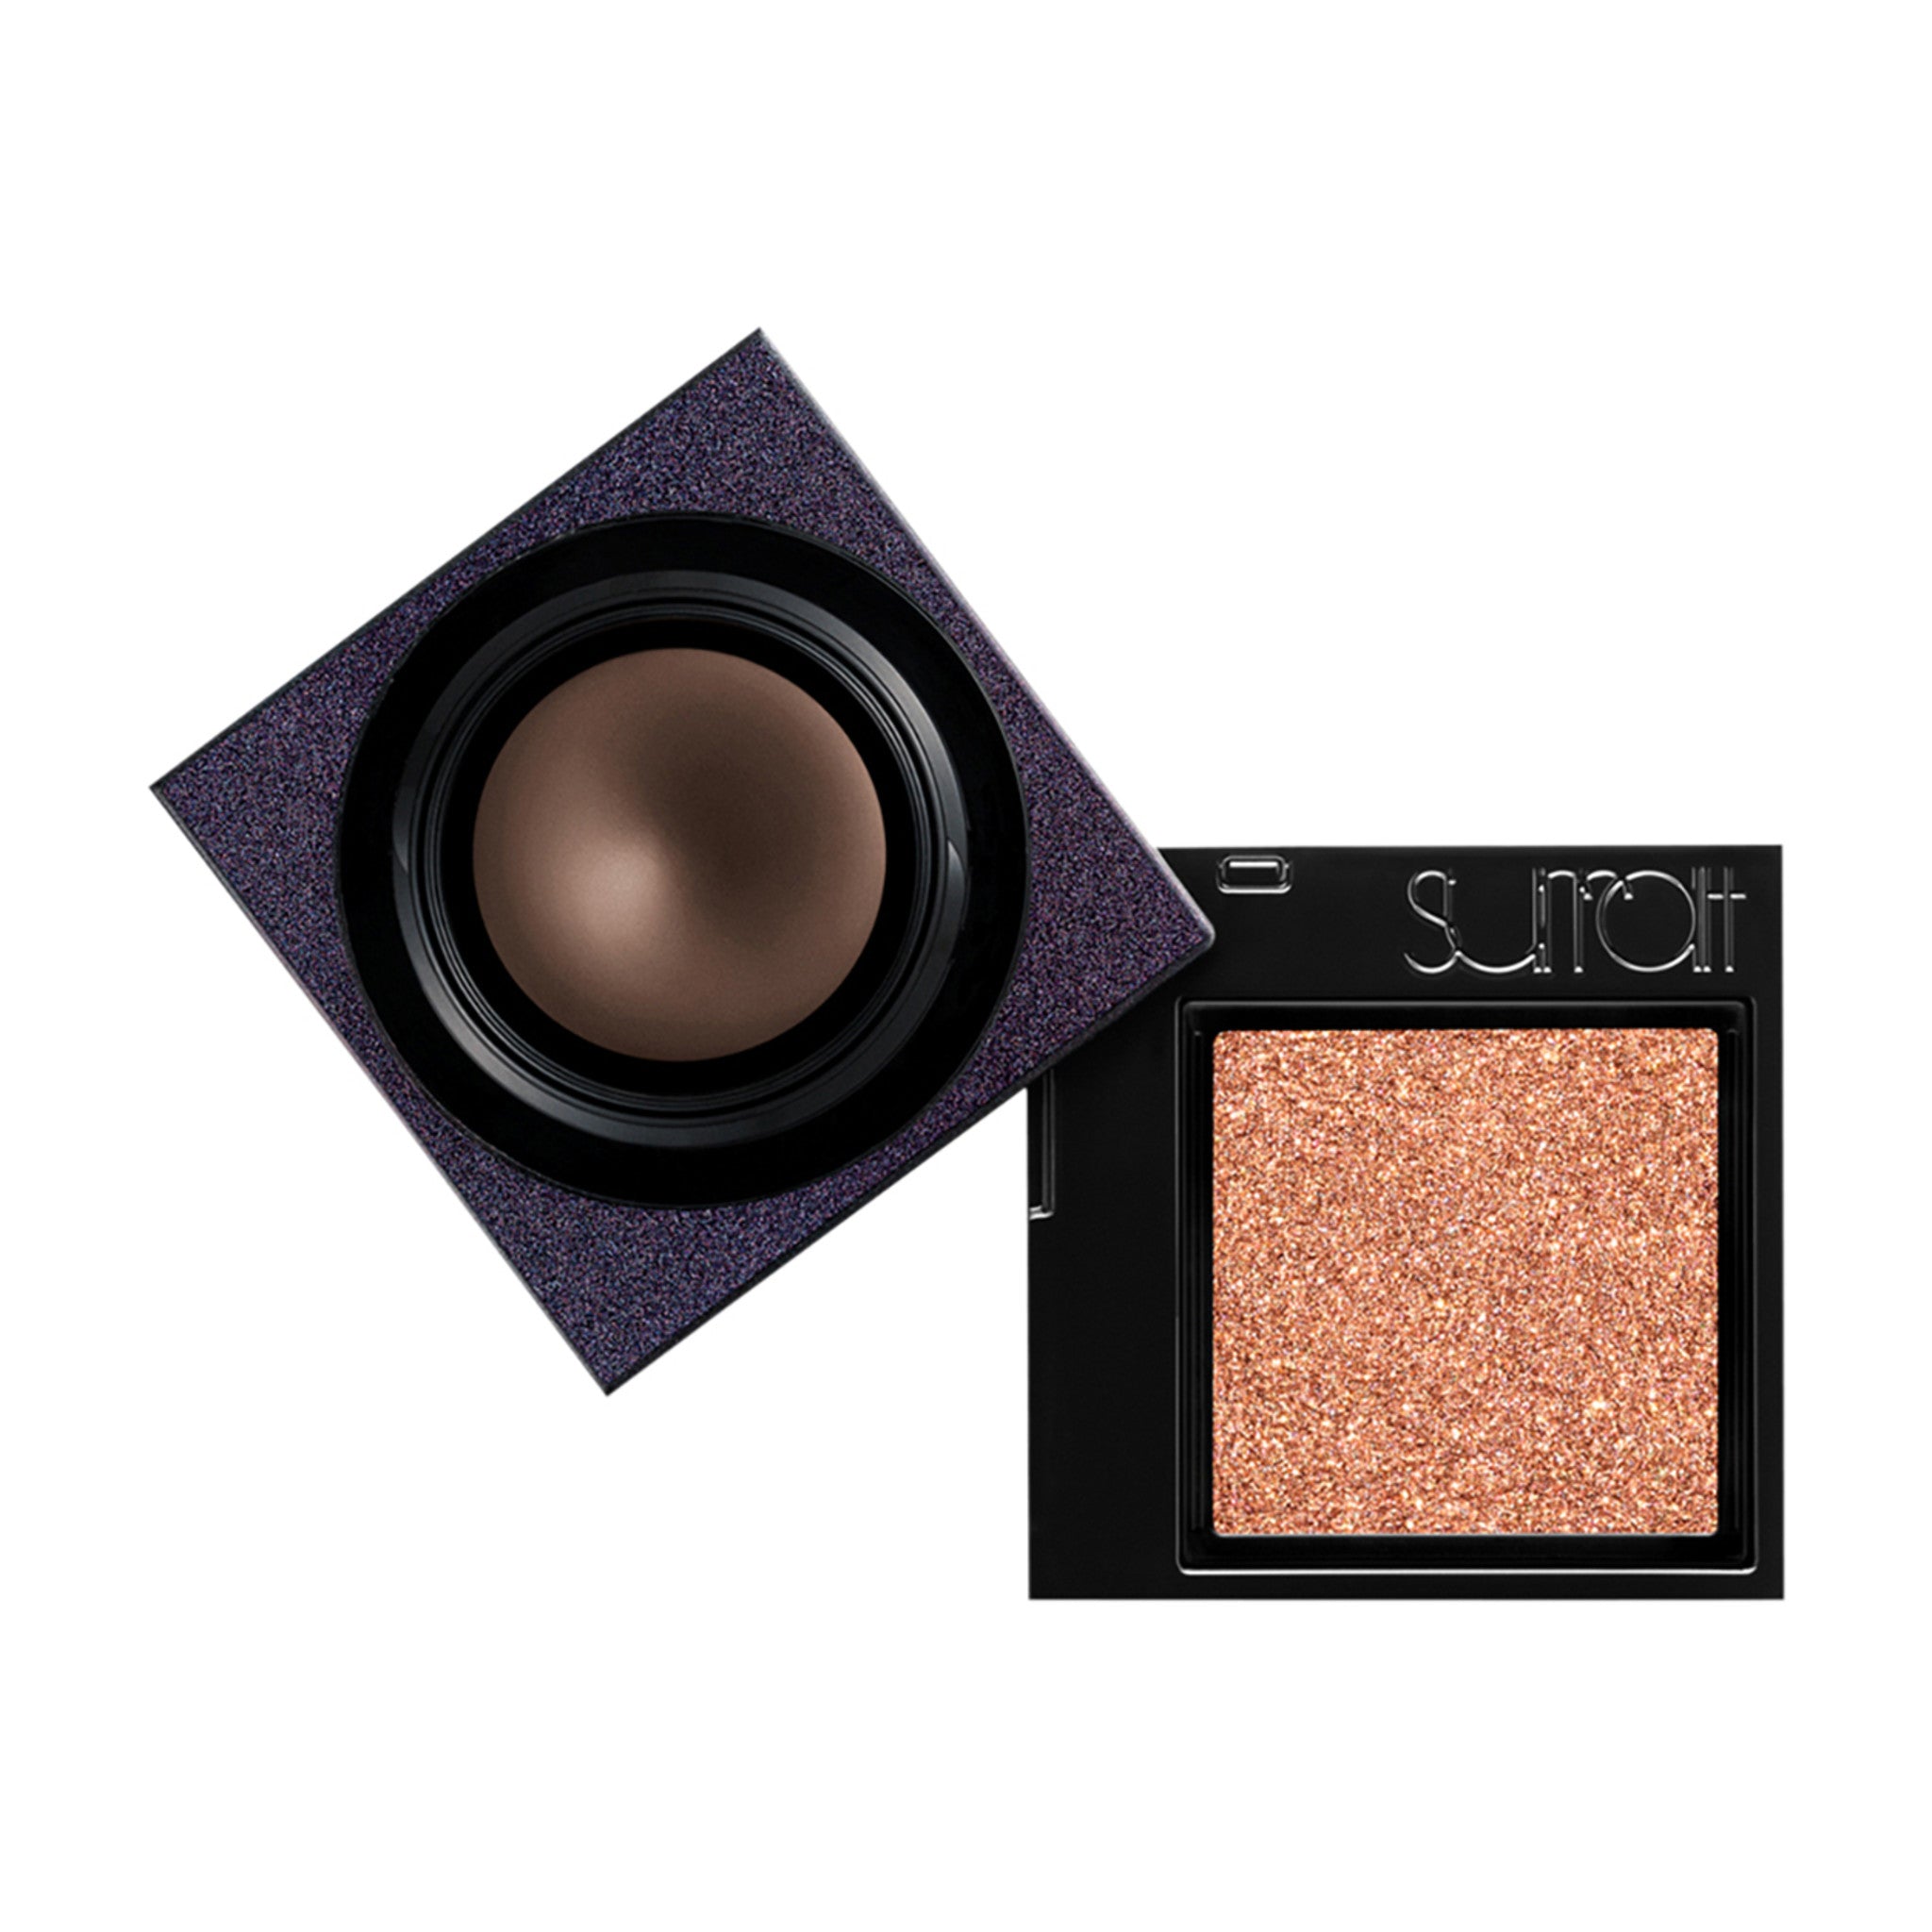 Surratt Prismatique Eyes Color/Shade variant: Neutral main image. This product is in the color orange